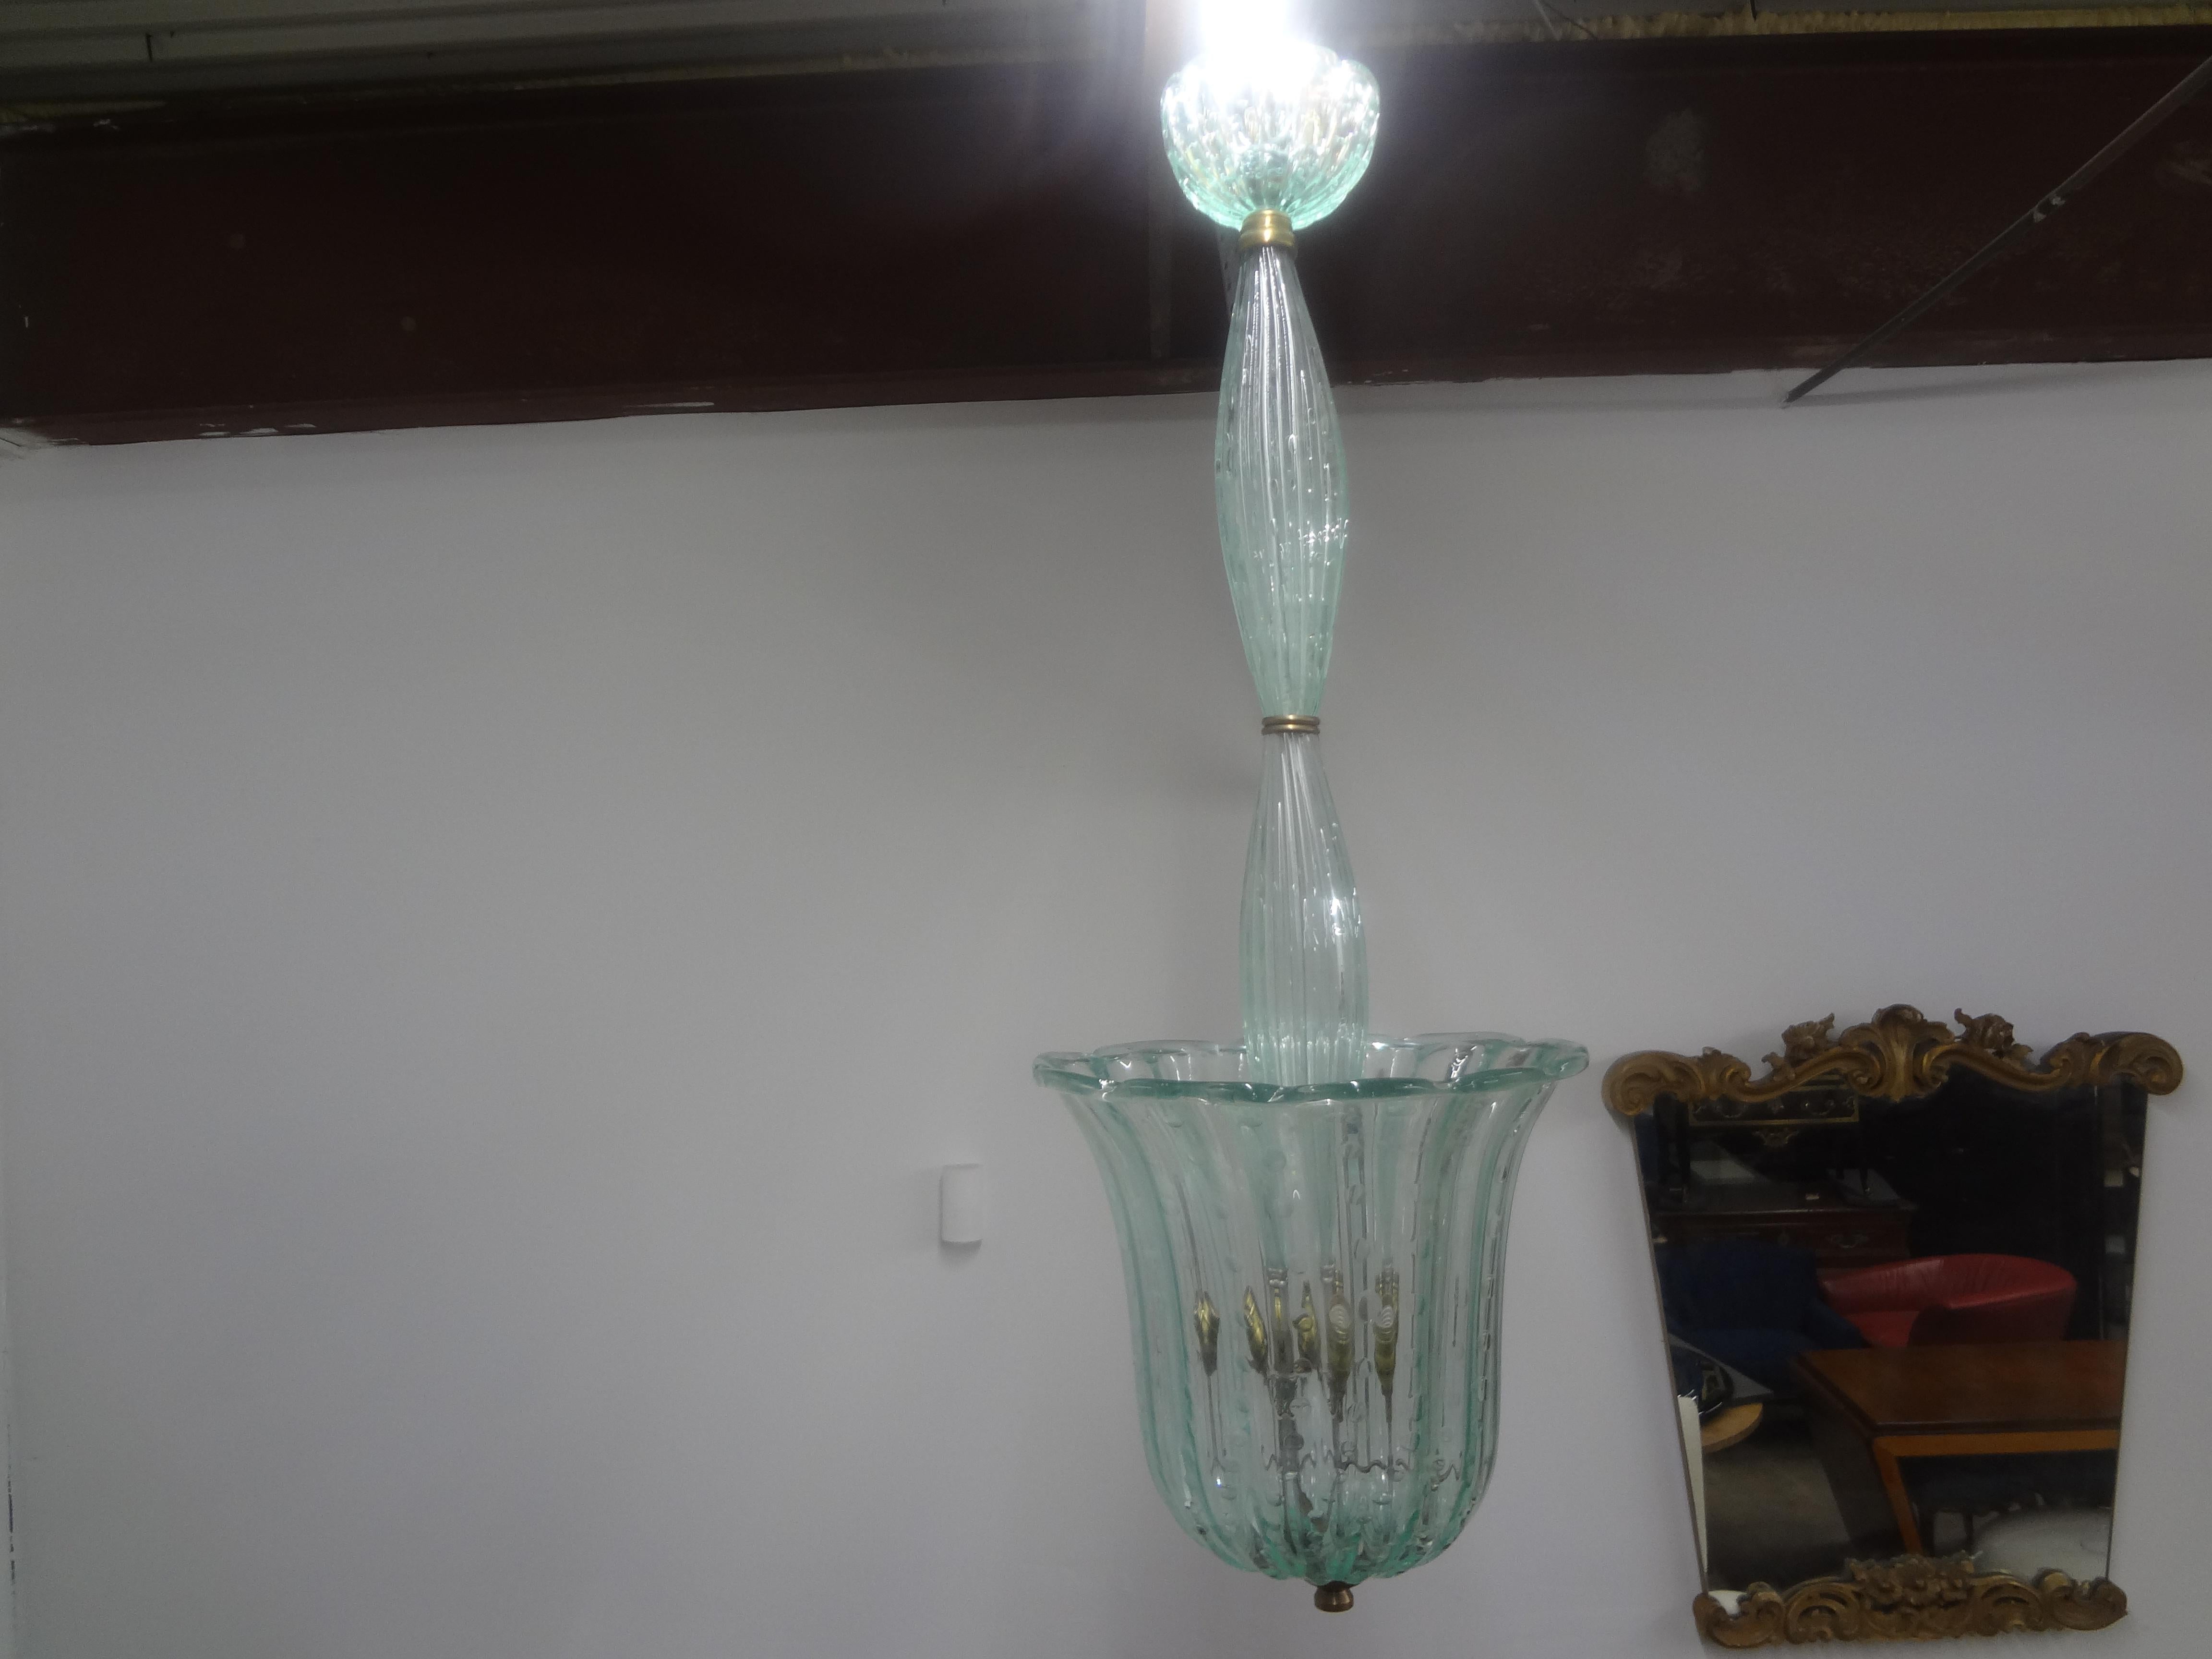 Vintage Murano Glass Lantern By Barovier & Toso.
This lovely mid century Murano glass lantern is made of a soft green blown glass with controlled bubbles accented with brass. 
This unusual Murano glass lantern has been newly wired for the U.S.